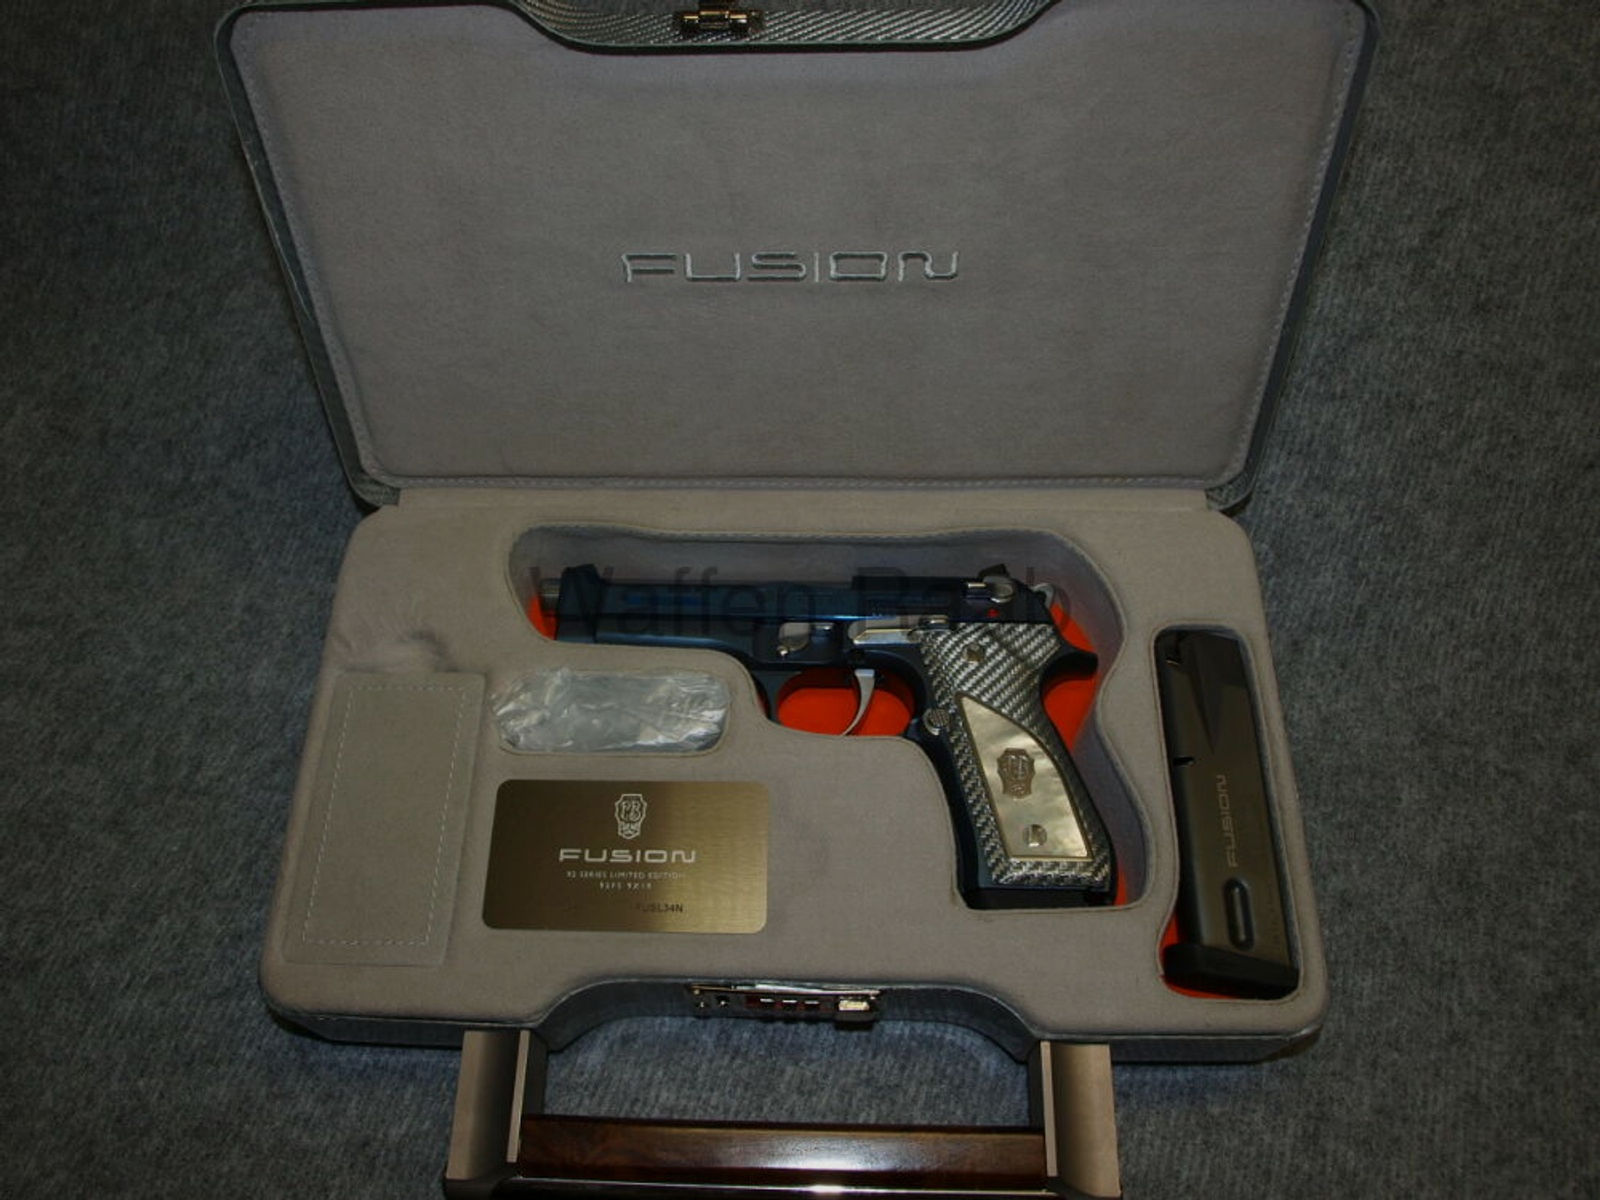 Beretta FUSION  Blue 92 FS	 Beretta FUSION  Blue 92 FS 92 Series Limited Edition